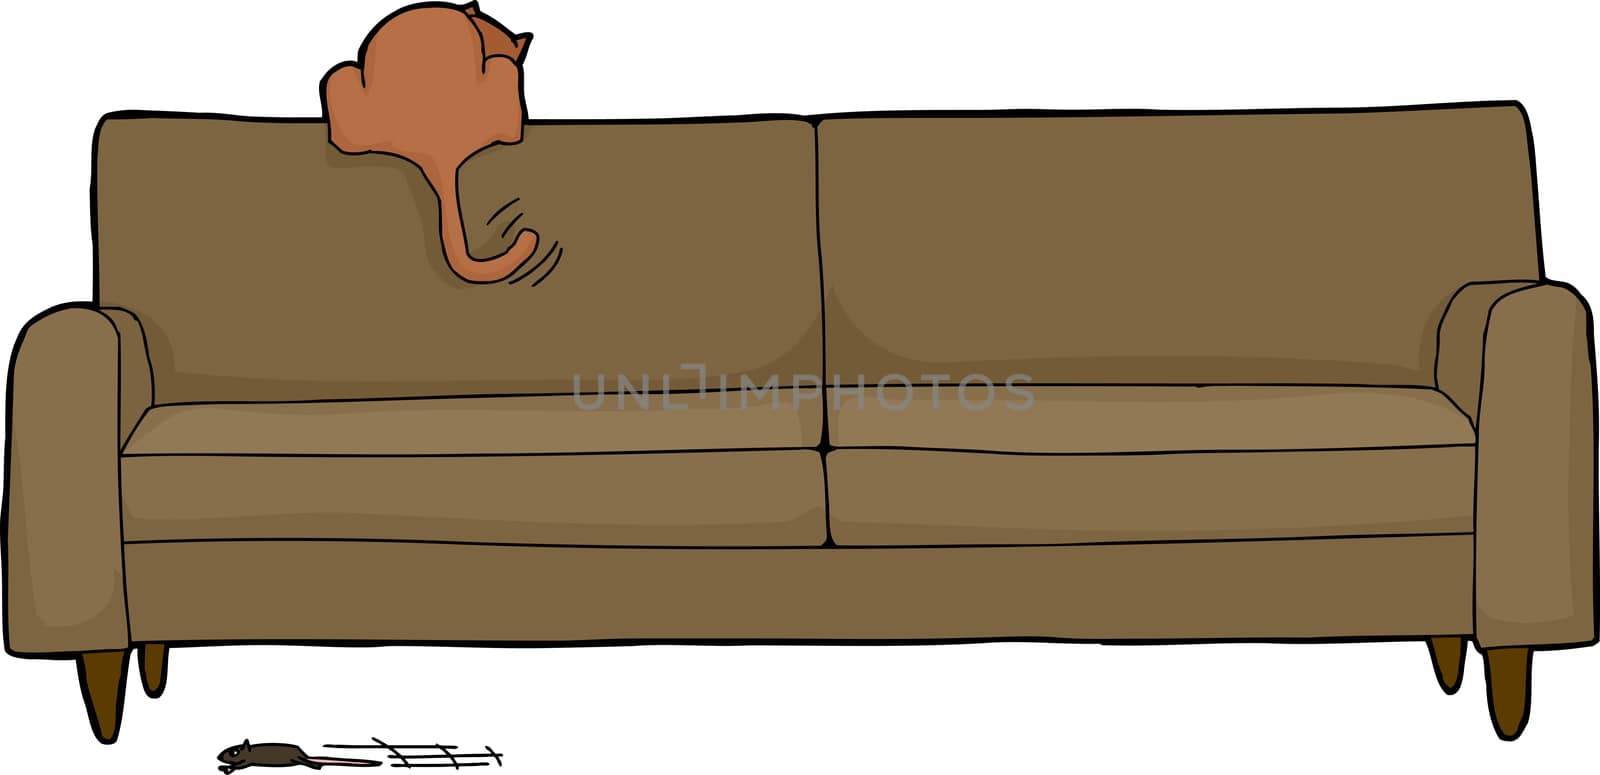 Cartoon of brown housecat looking for mouse under sofa